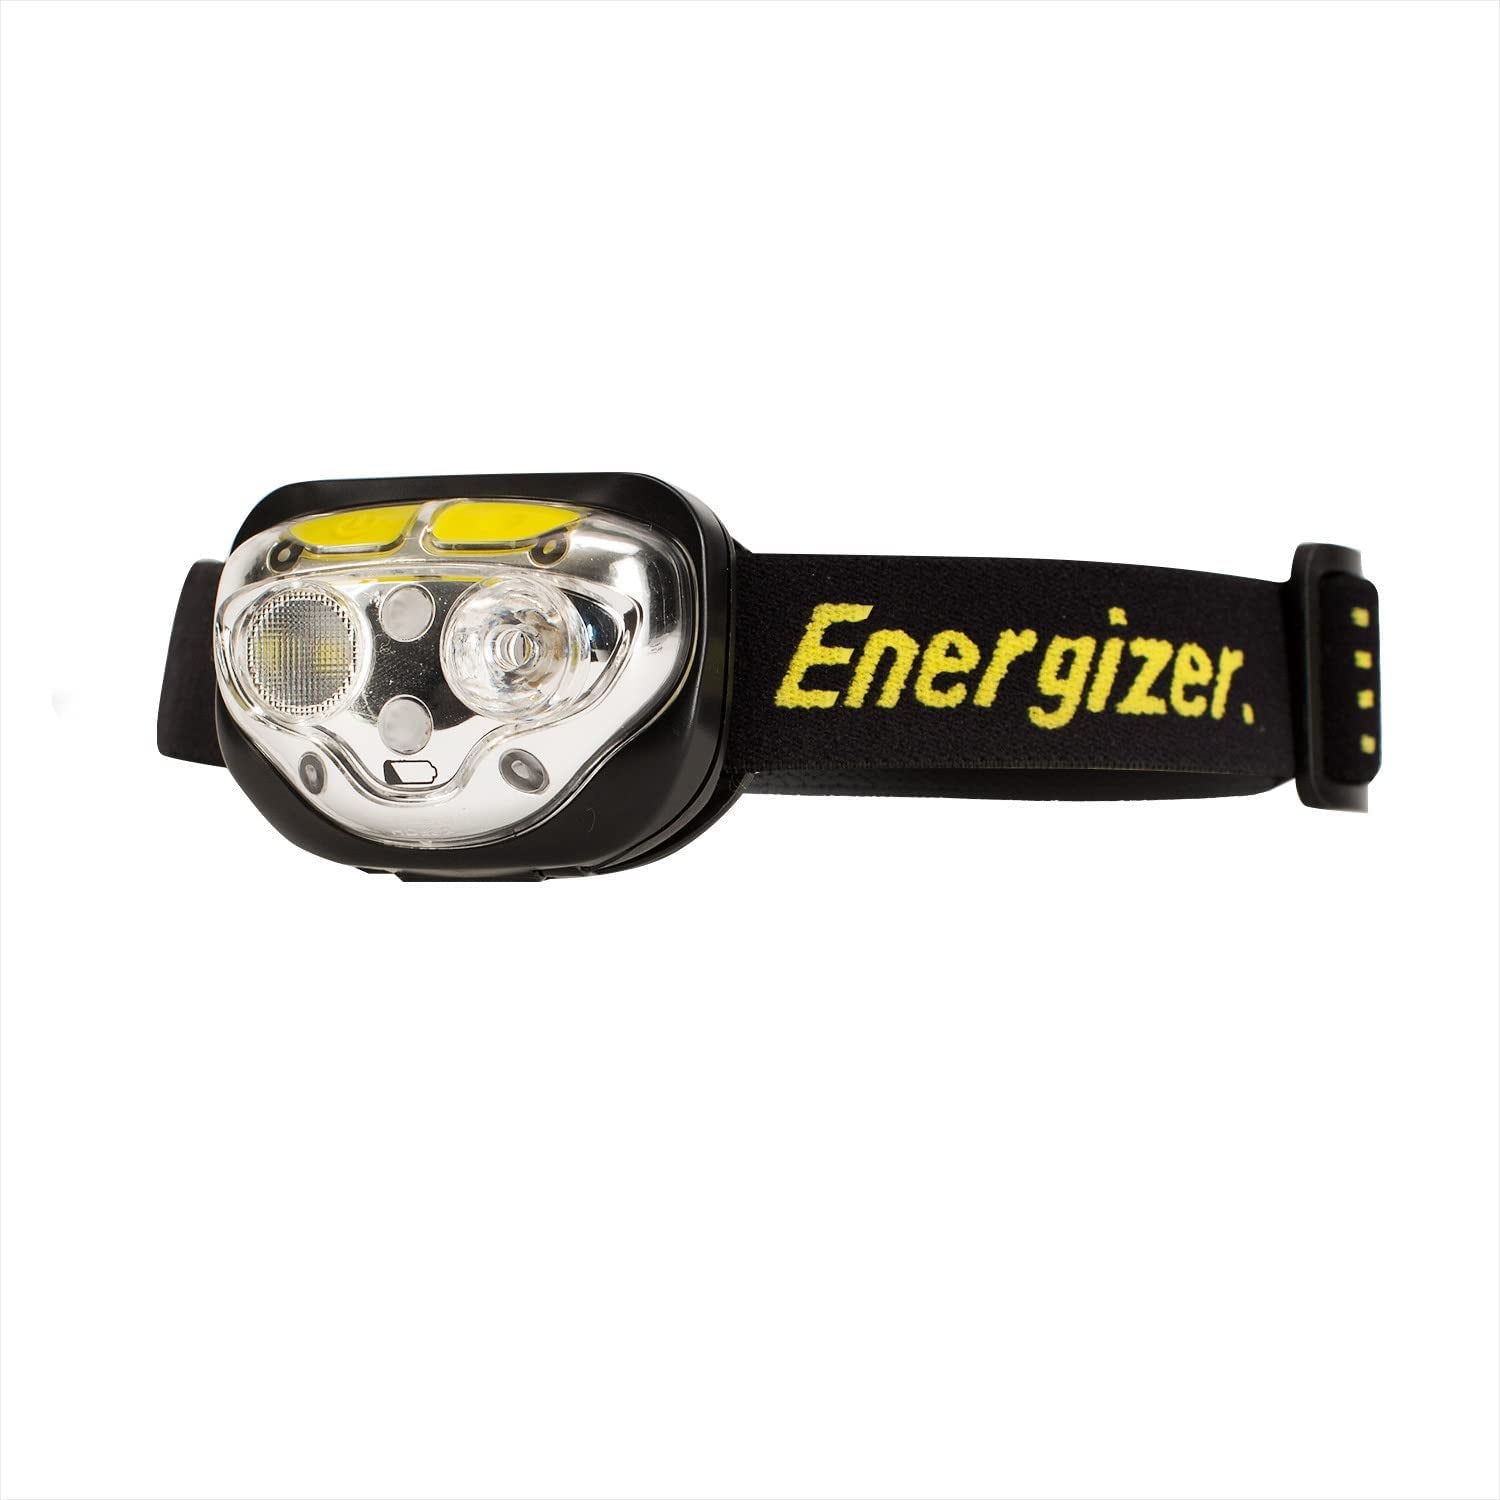 Energizer, Energizer Vision LED Headlamp Flashlight, 400 High Lumens, IPX4 Water Resistant, Multiple Modes, Best Headlight for Camping, Running, Outdoors, Emergency Light, Rechargeable or Battery-Powered